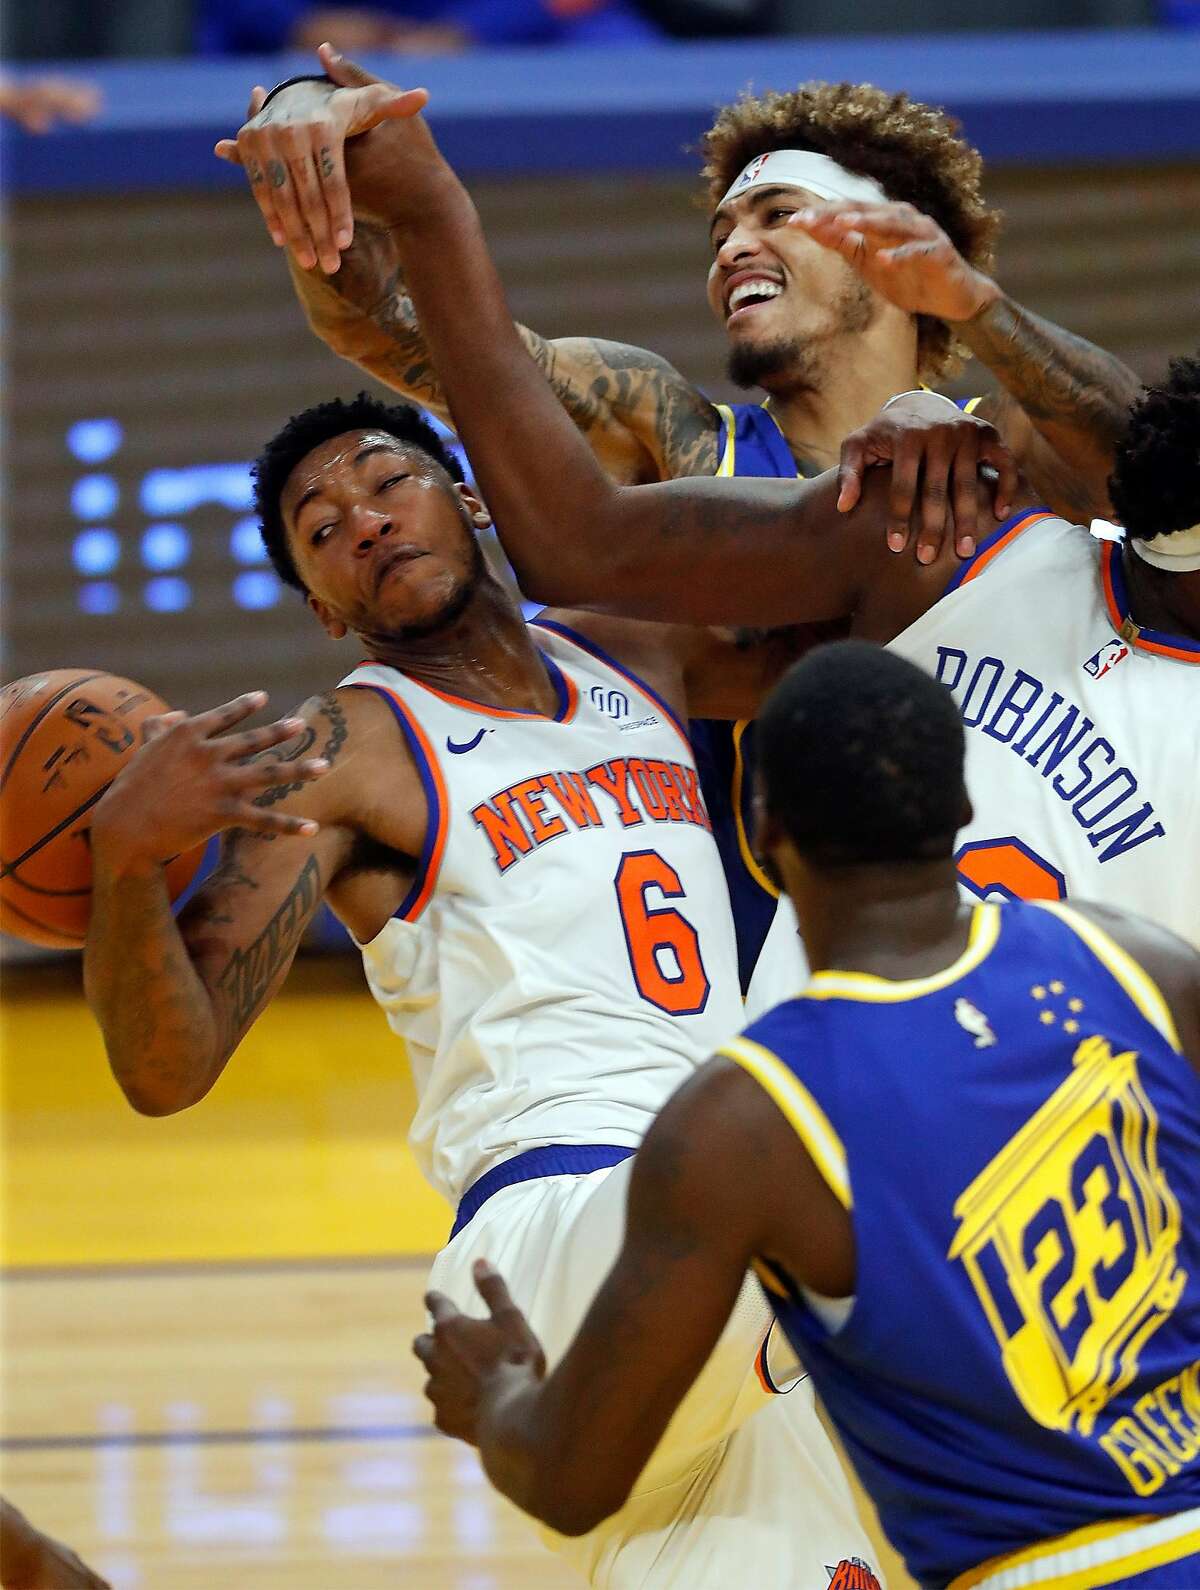 Golden State Warriors' Kelly Oubre, Jr. and New York Knicks' Elfrid Payton vie for a rebound in 1st quarter during NBA game at Chase Center in San Francisco, Calif., on Thursday, January 21, 2021.